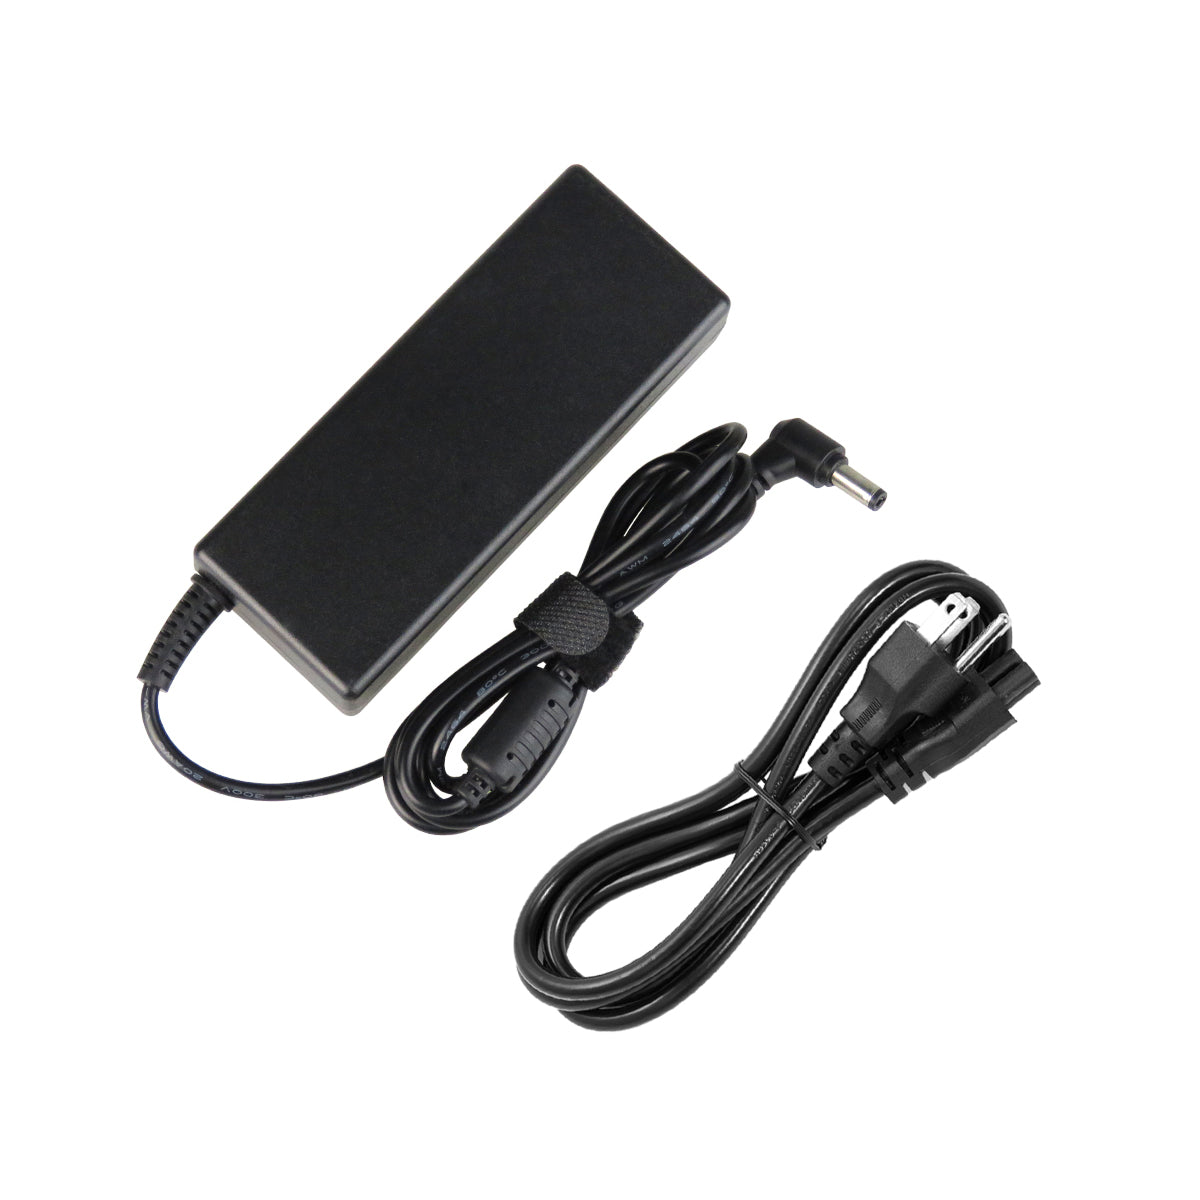 AC Adapter Charger for ASUS X55a Notebook.